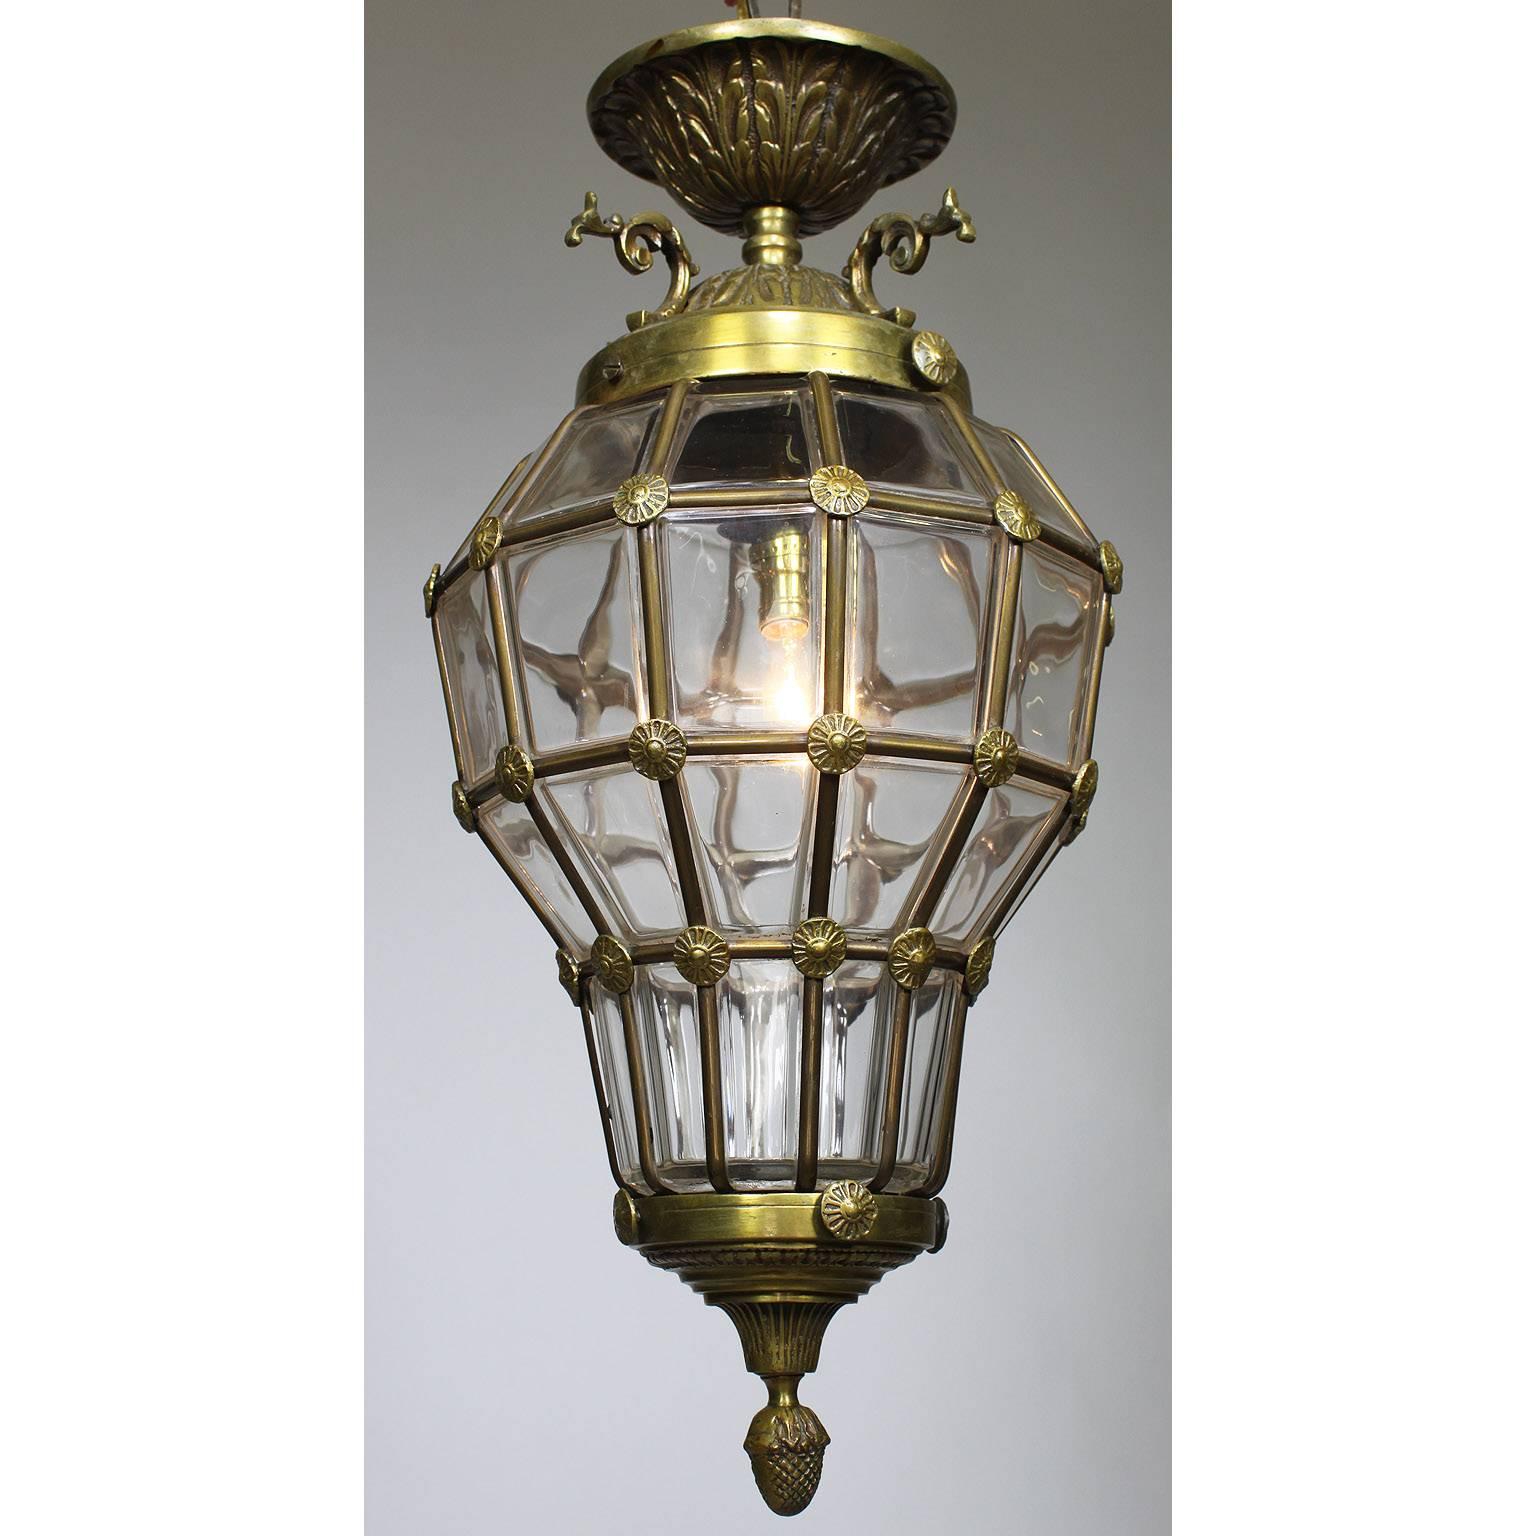 A French mid-20th century Louis XIV style gilt-metal and molded glass 